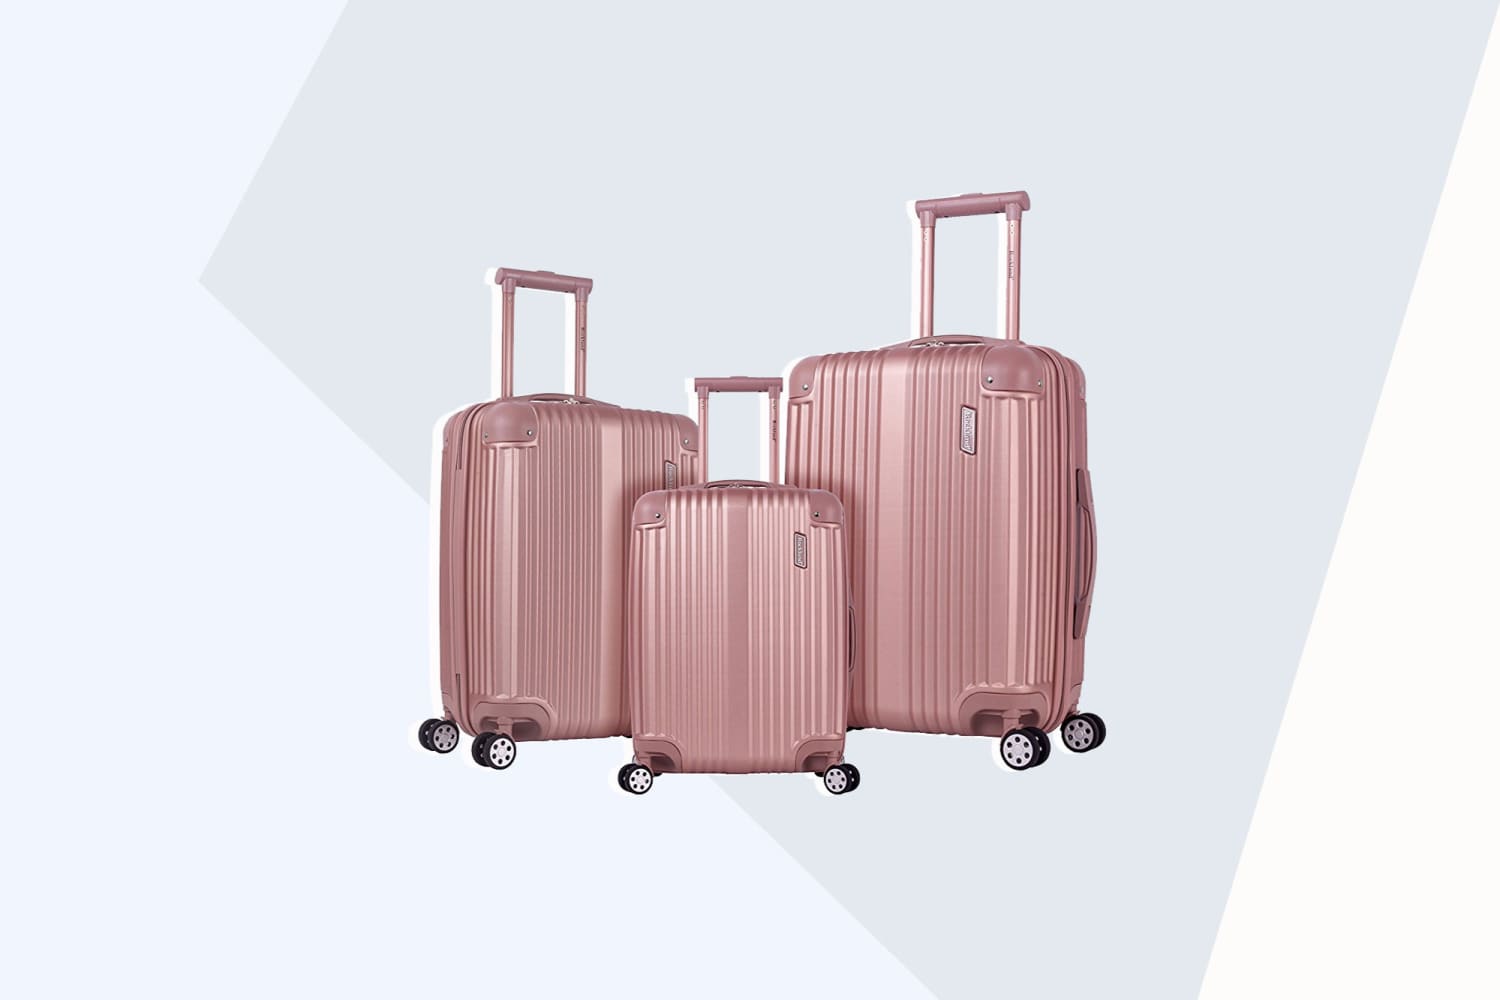 Amazon Prime Sale Rockland Hardside Luggage Discount | Apartment Therapy